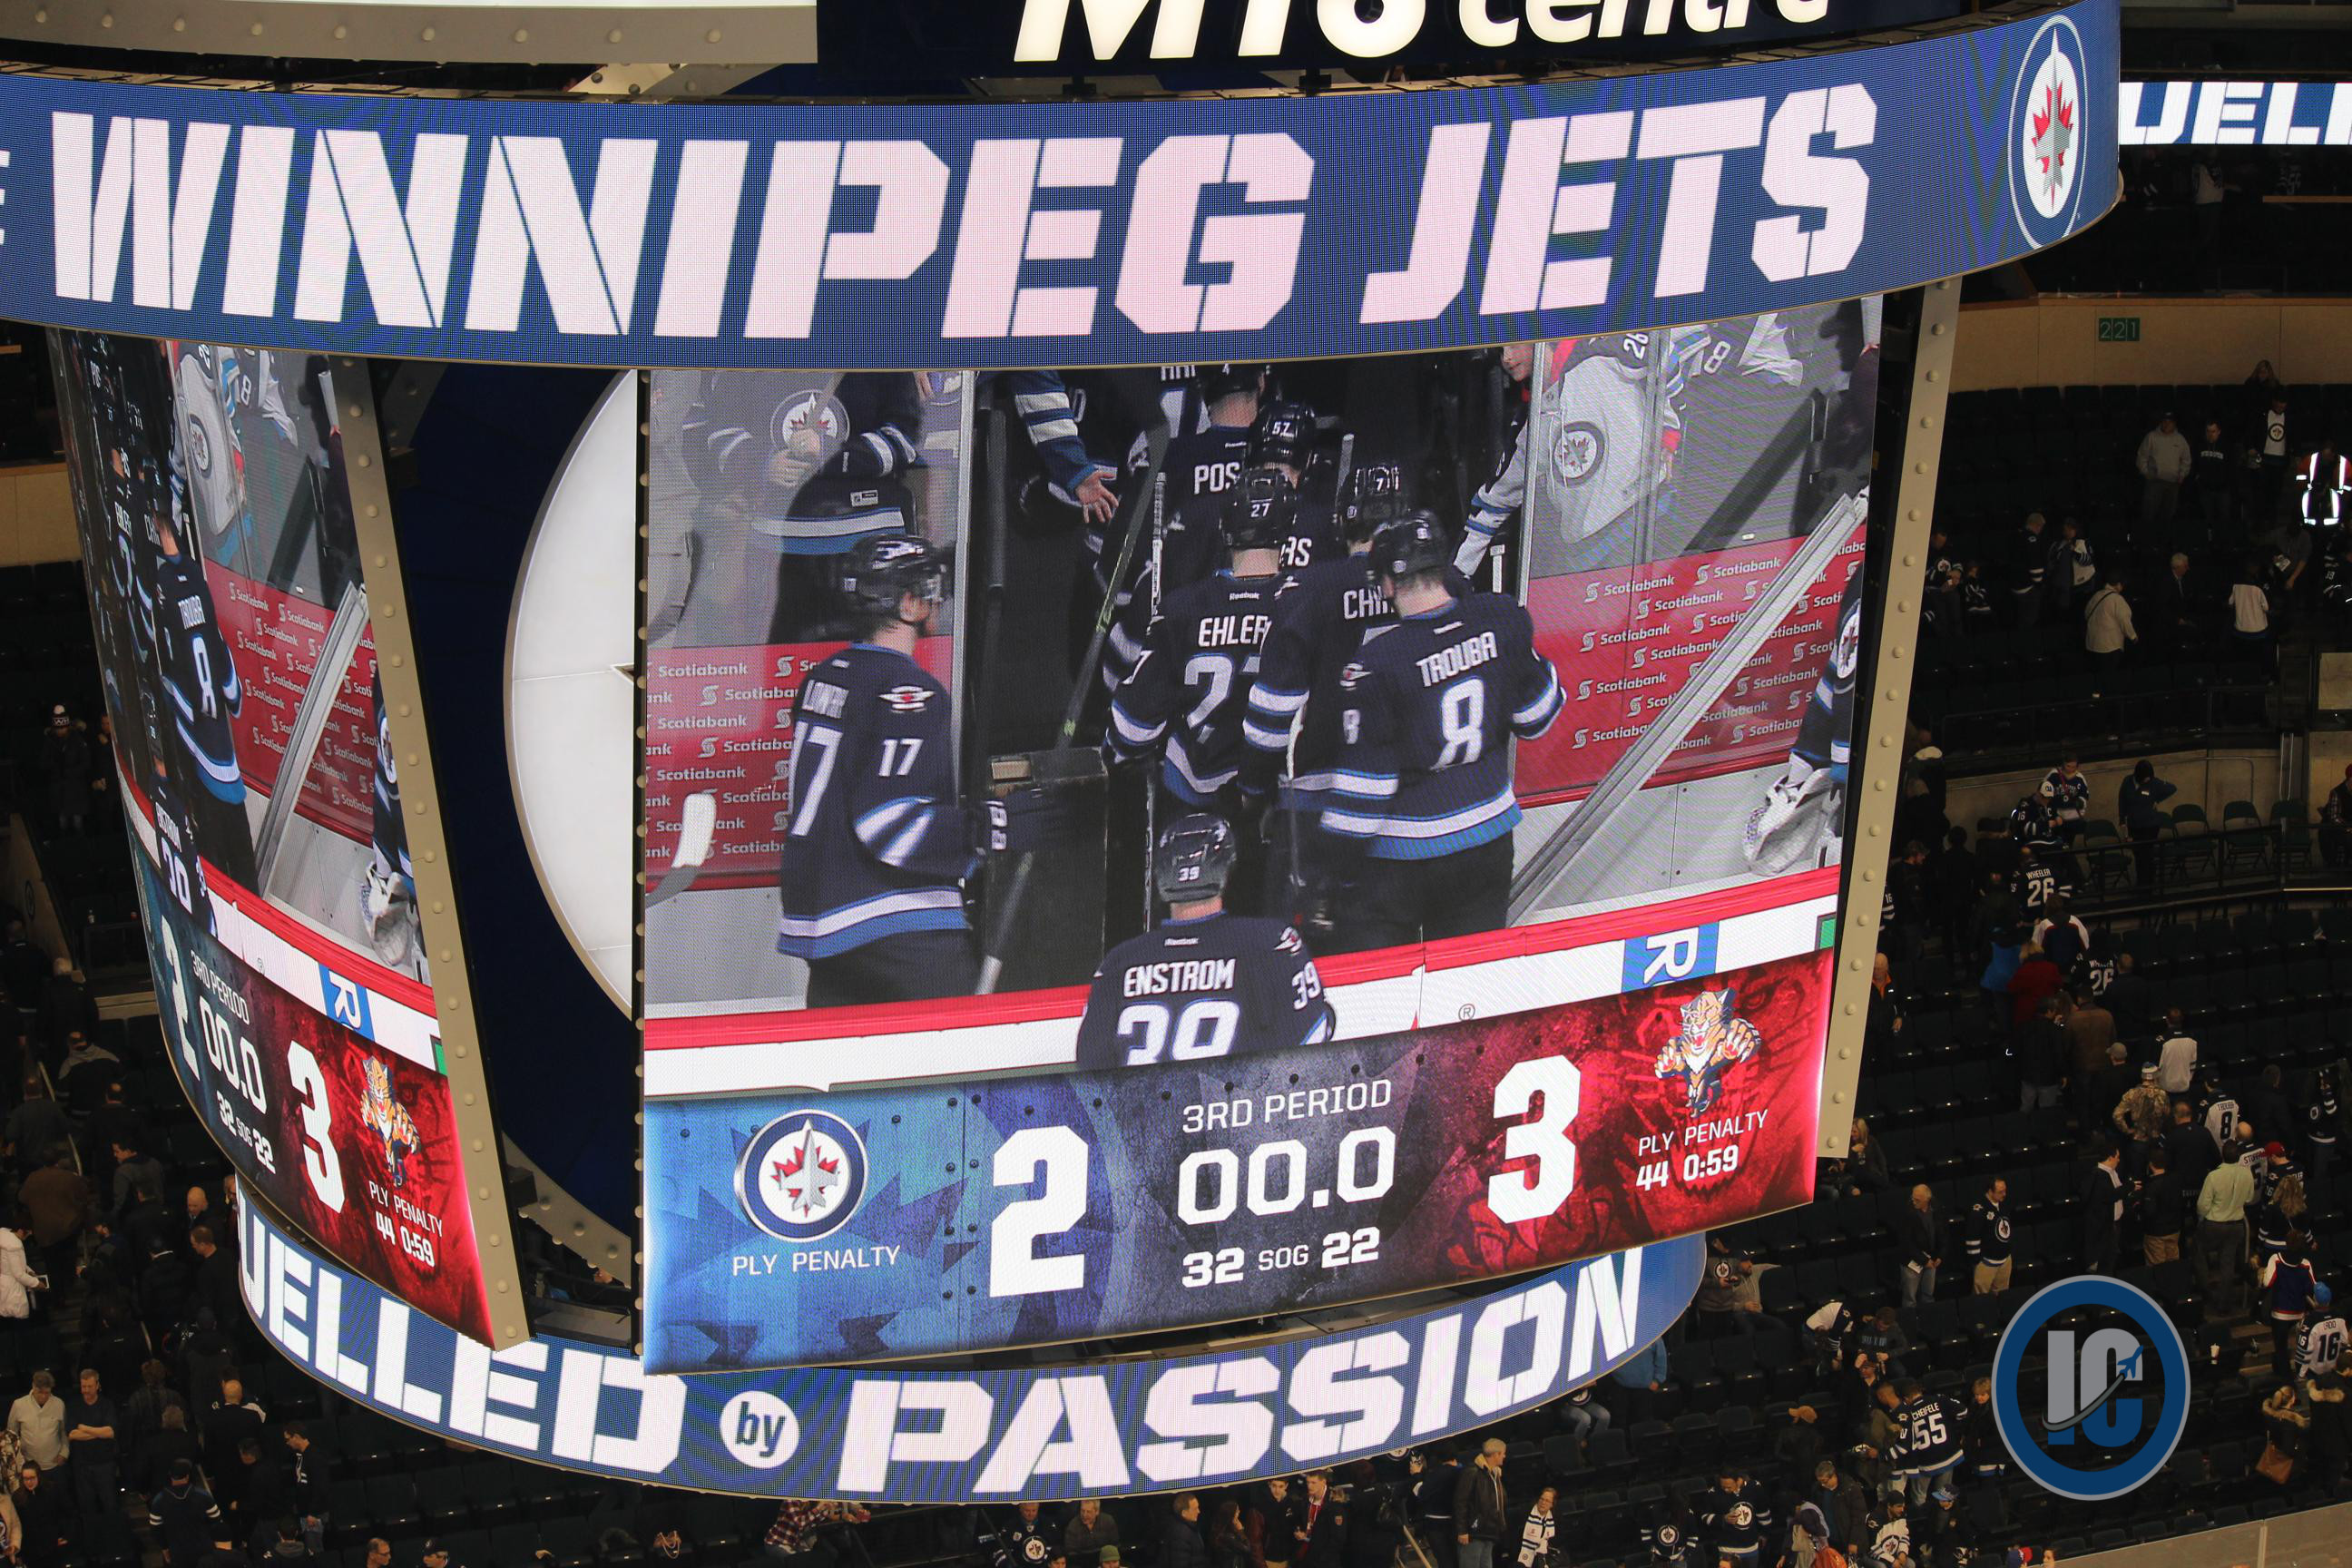 Panthers 3 Jets 2